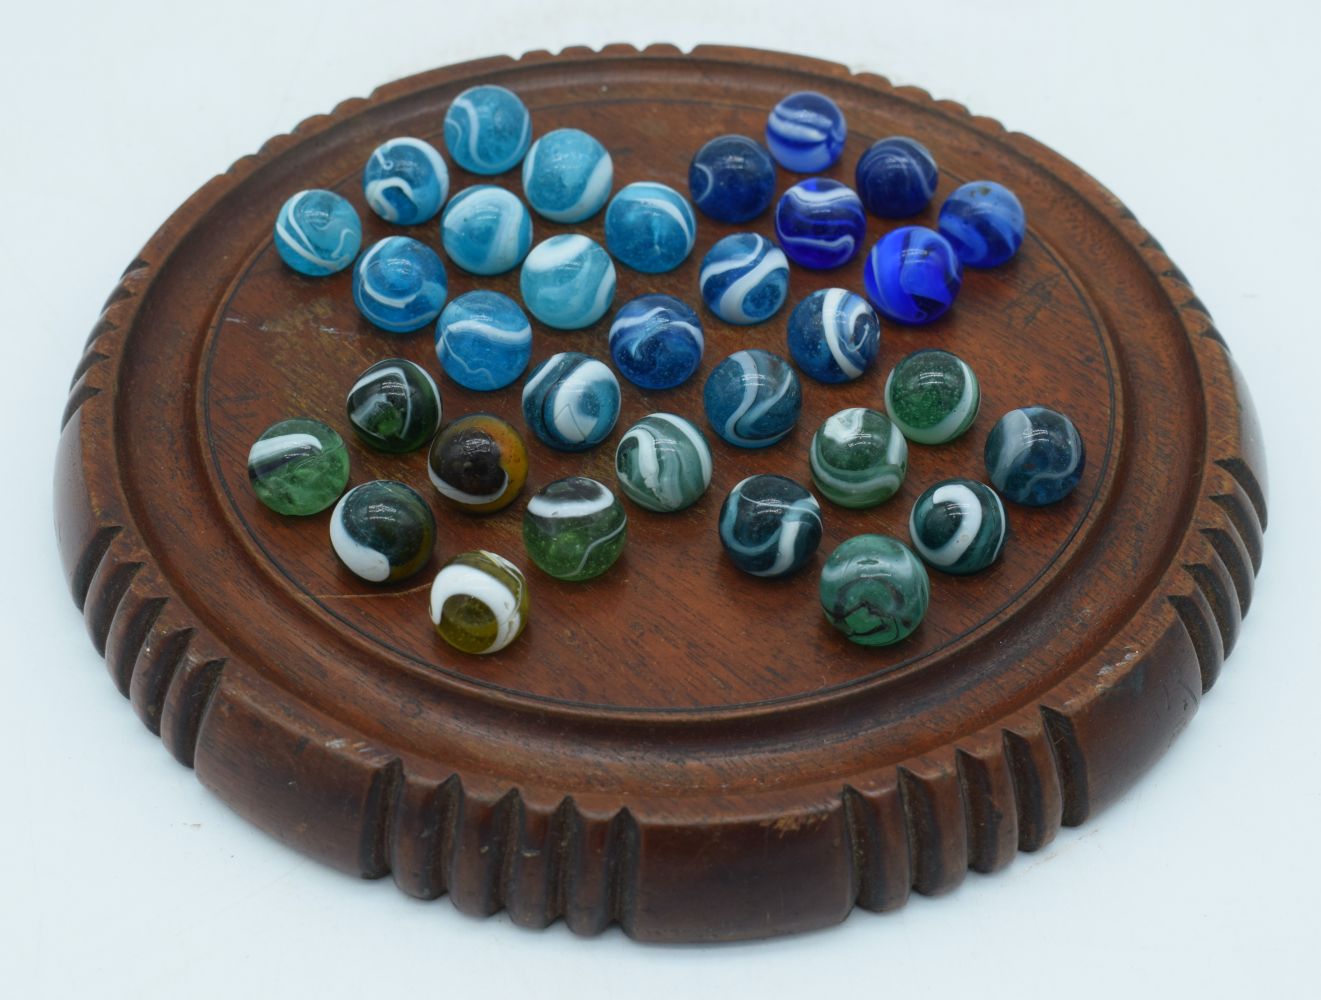 An antique Solitaire board with marbles 24 cm. - Image 4 of 4